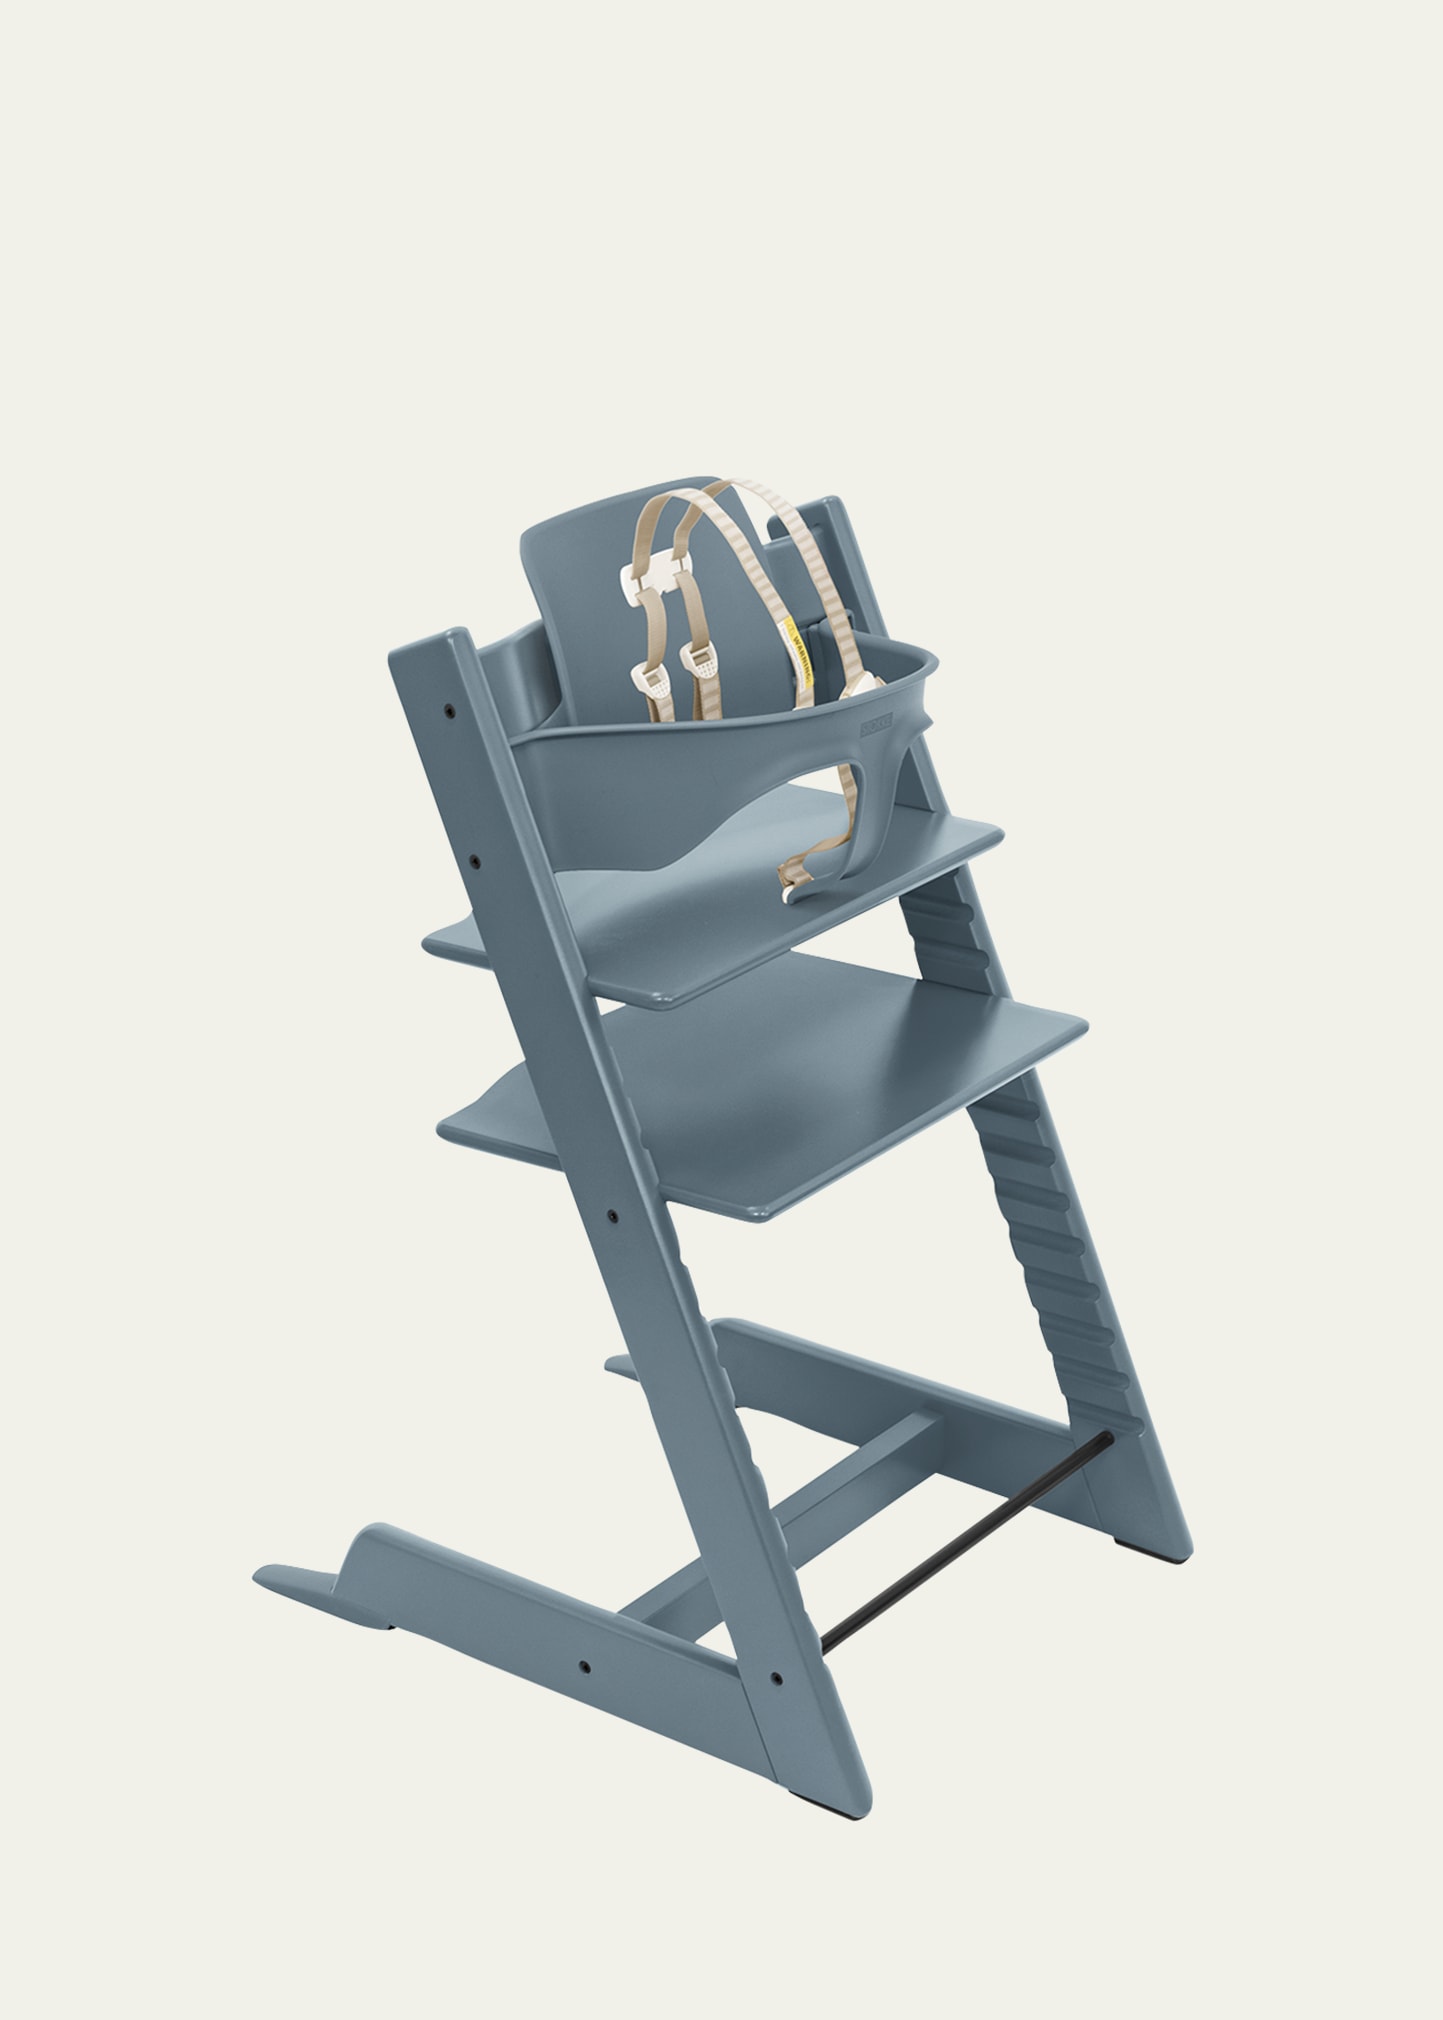 Stokke Tripp Trapp High Chair In Fjord Blue